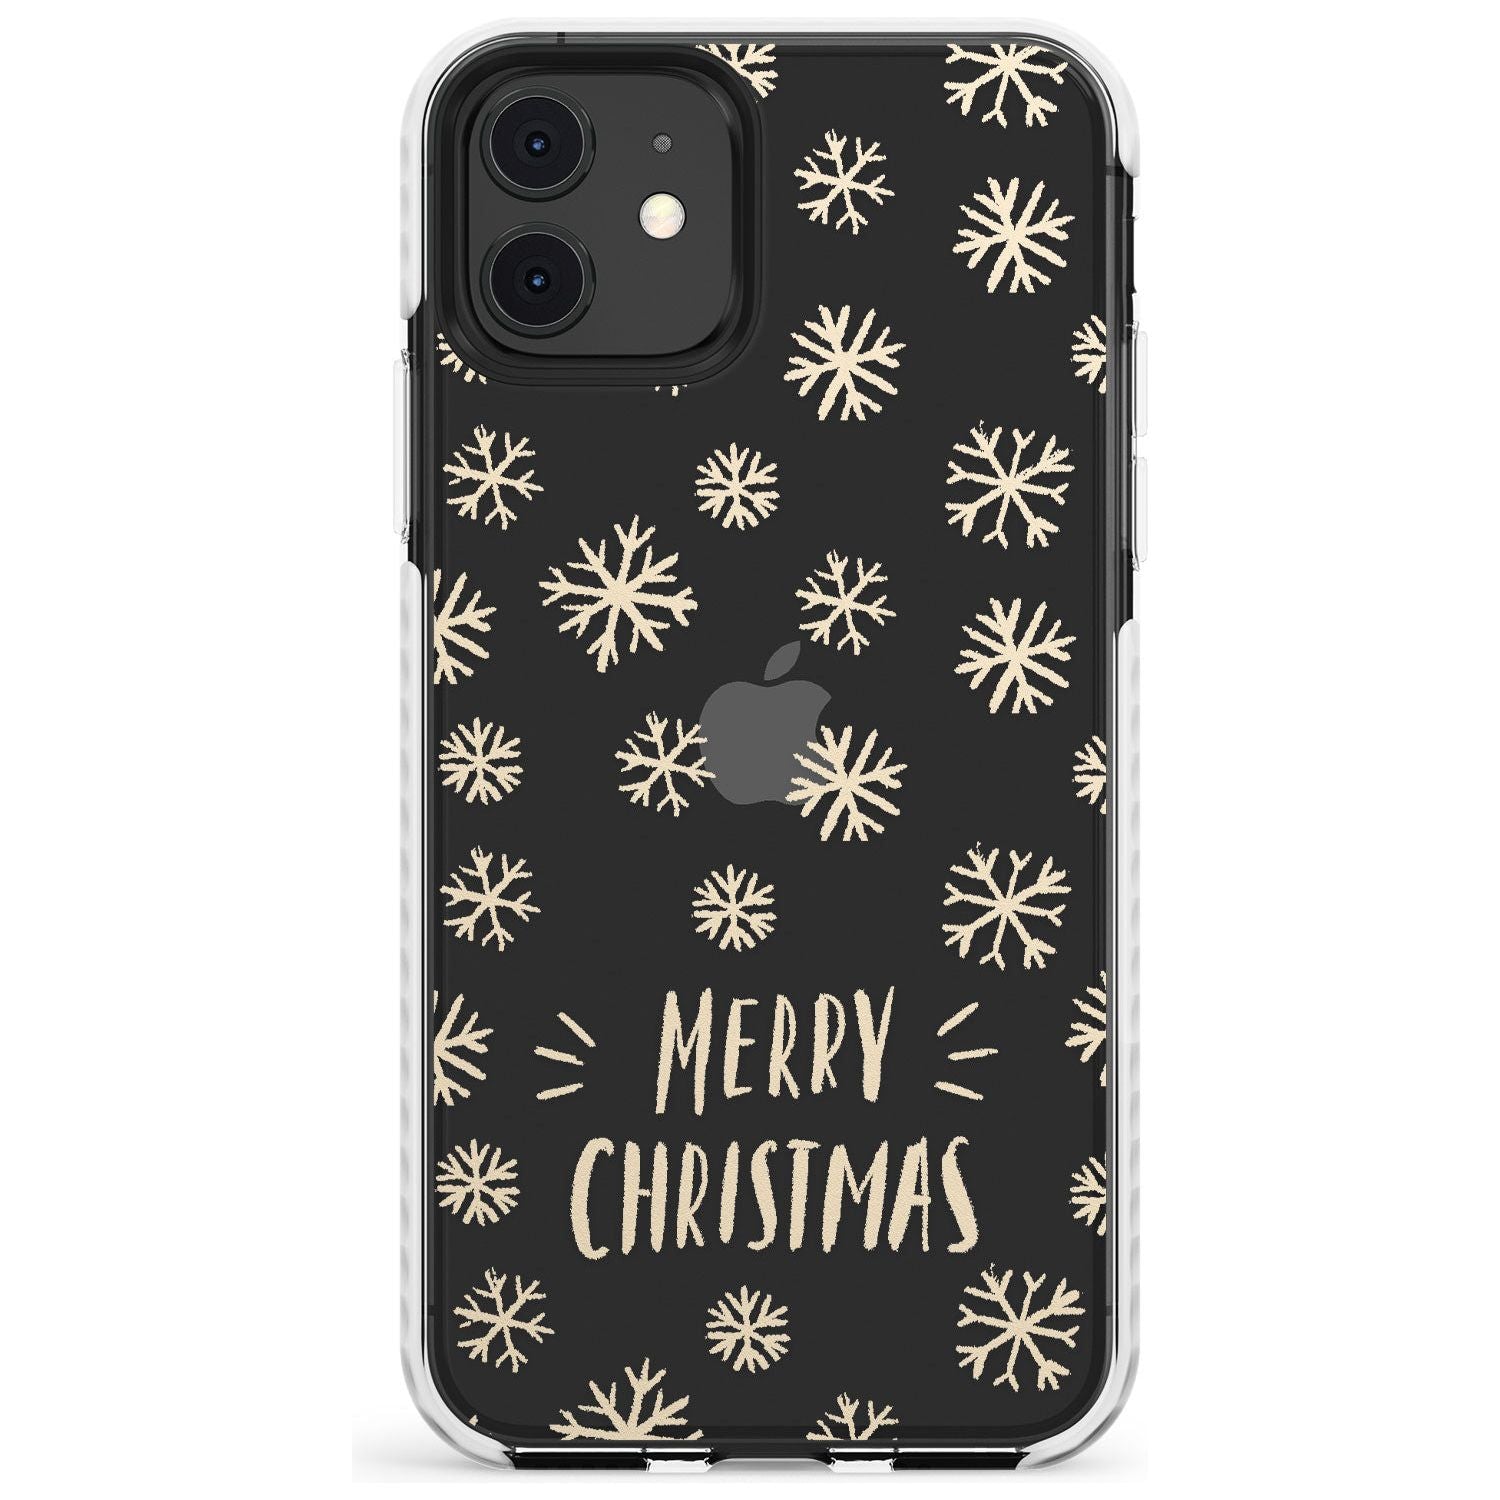 Christmas Snowflake Pattern Impact Phone Case for iPhone 11